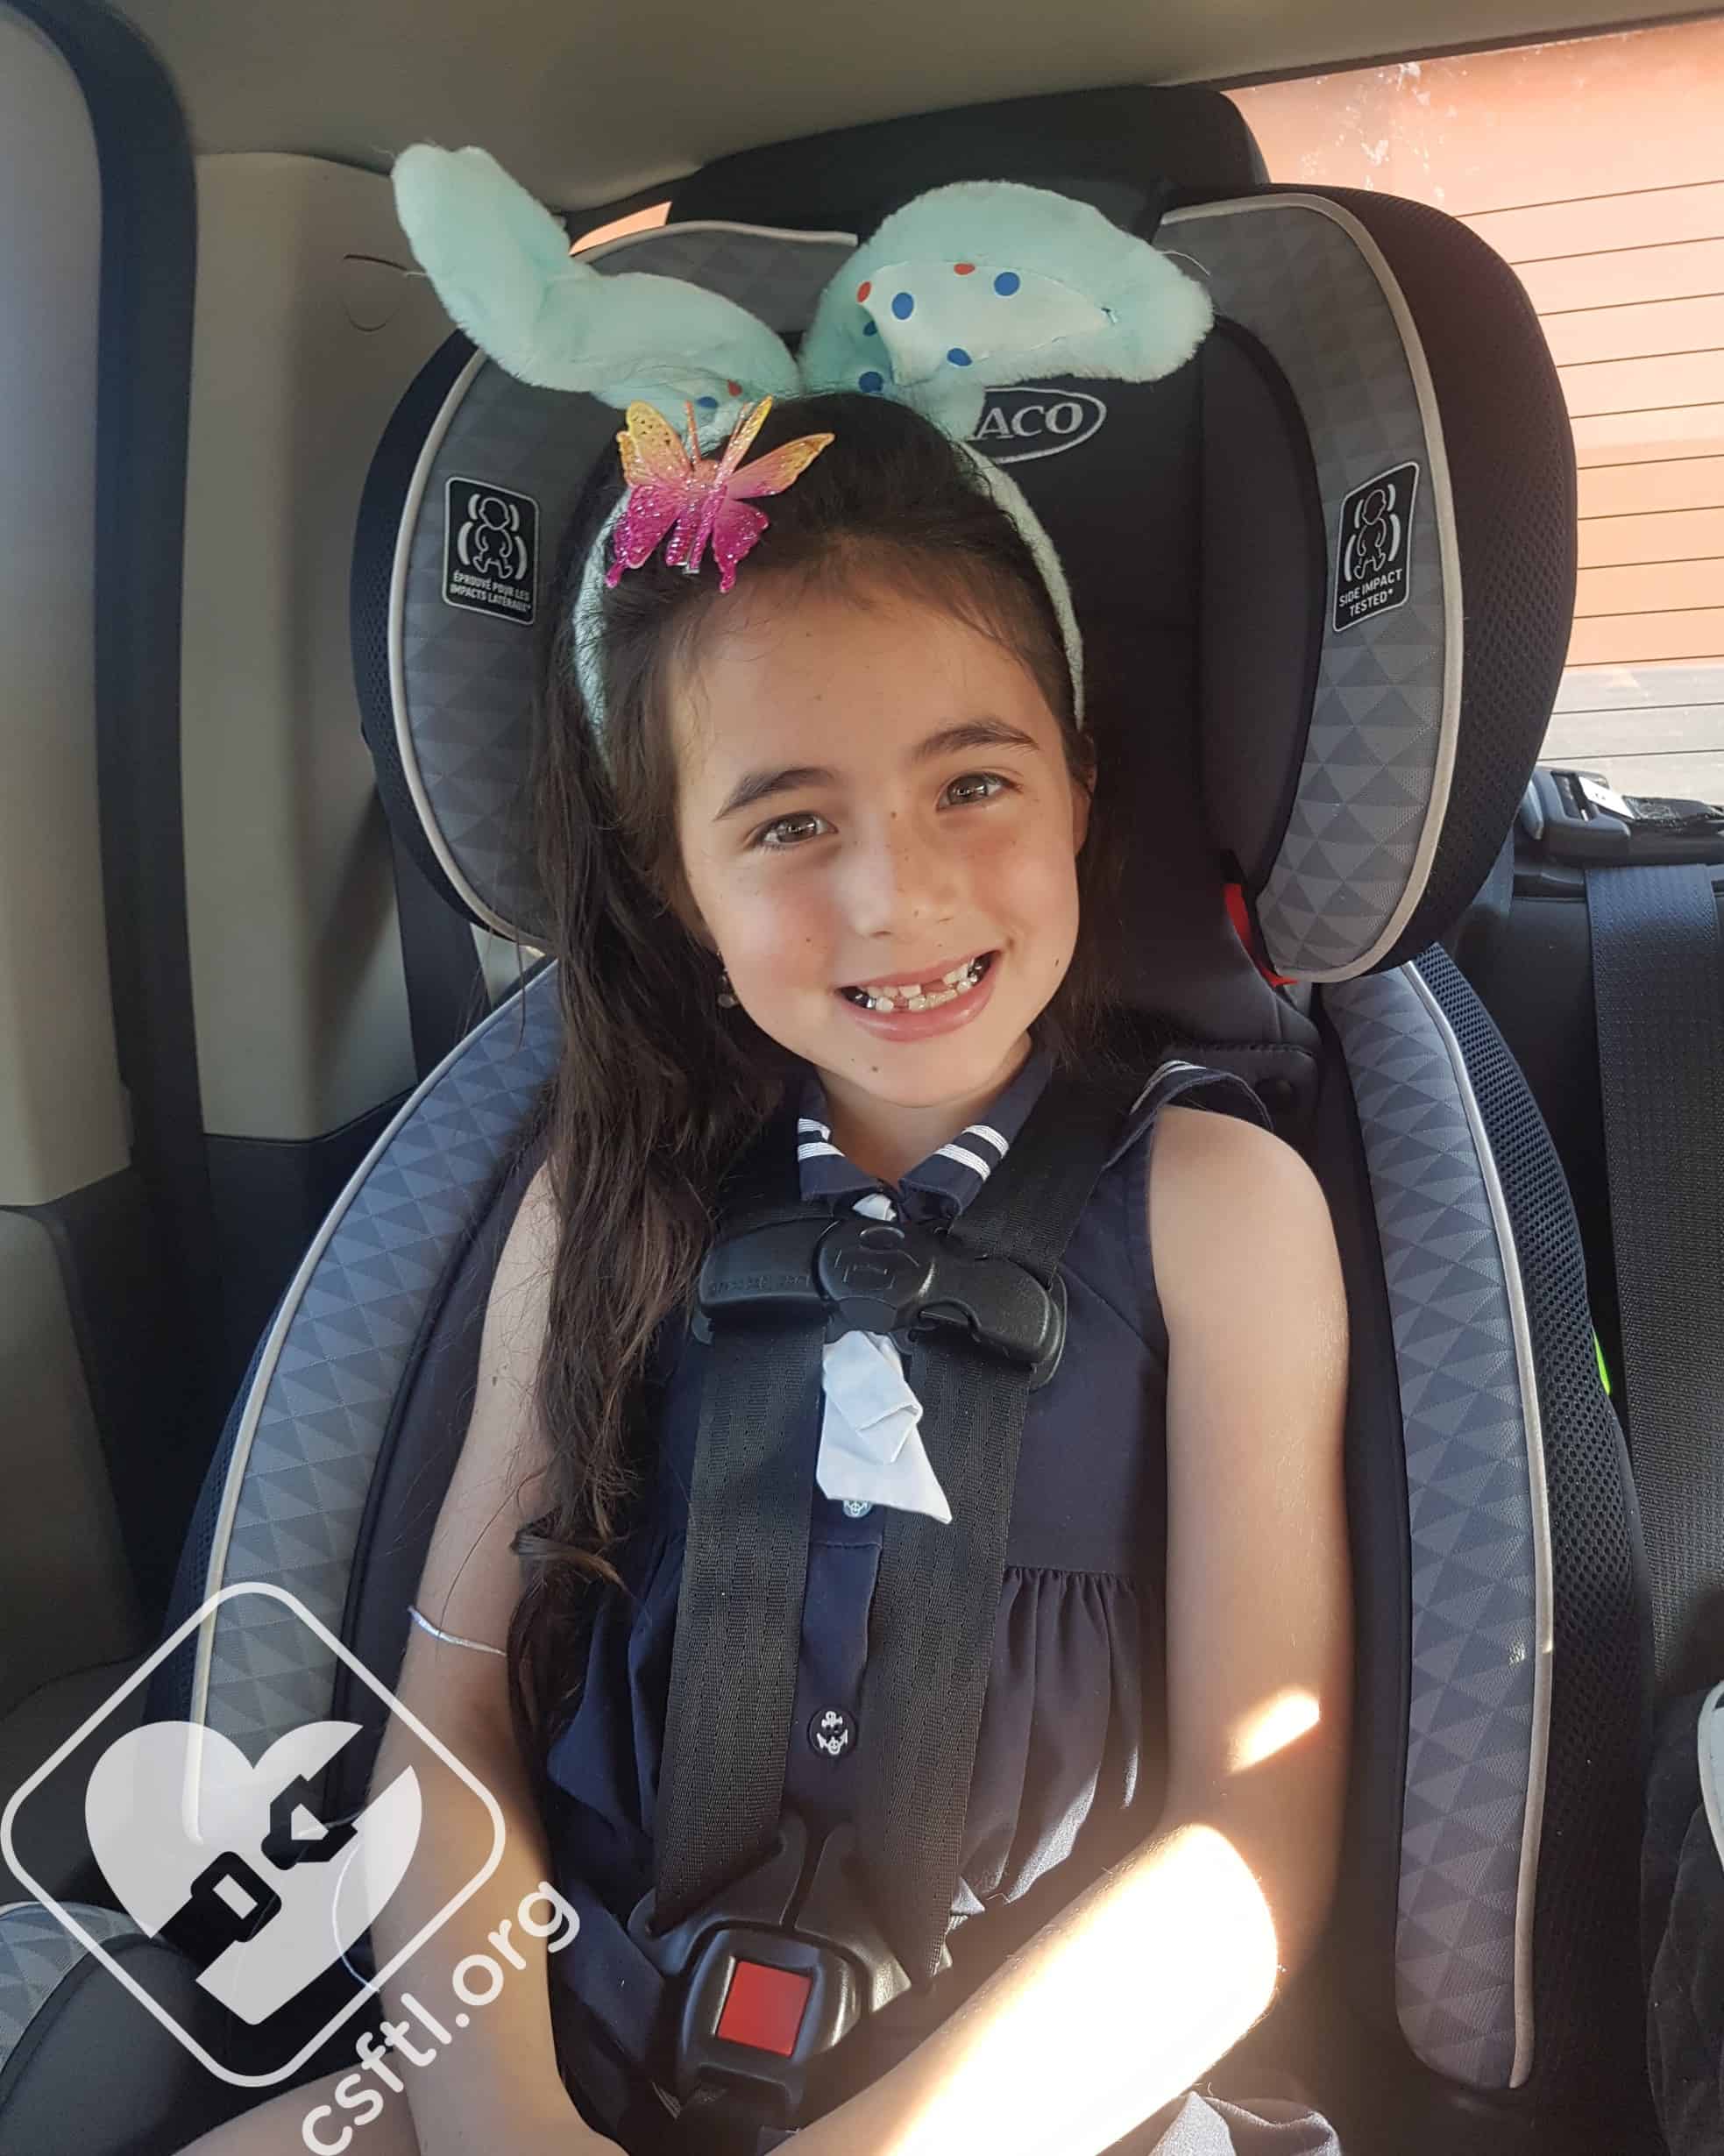 Graco 4ever Review Car Seats For The Littles - Is The Graco 4ever Car Seat Airline Approved